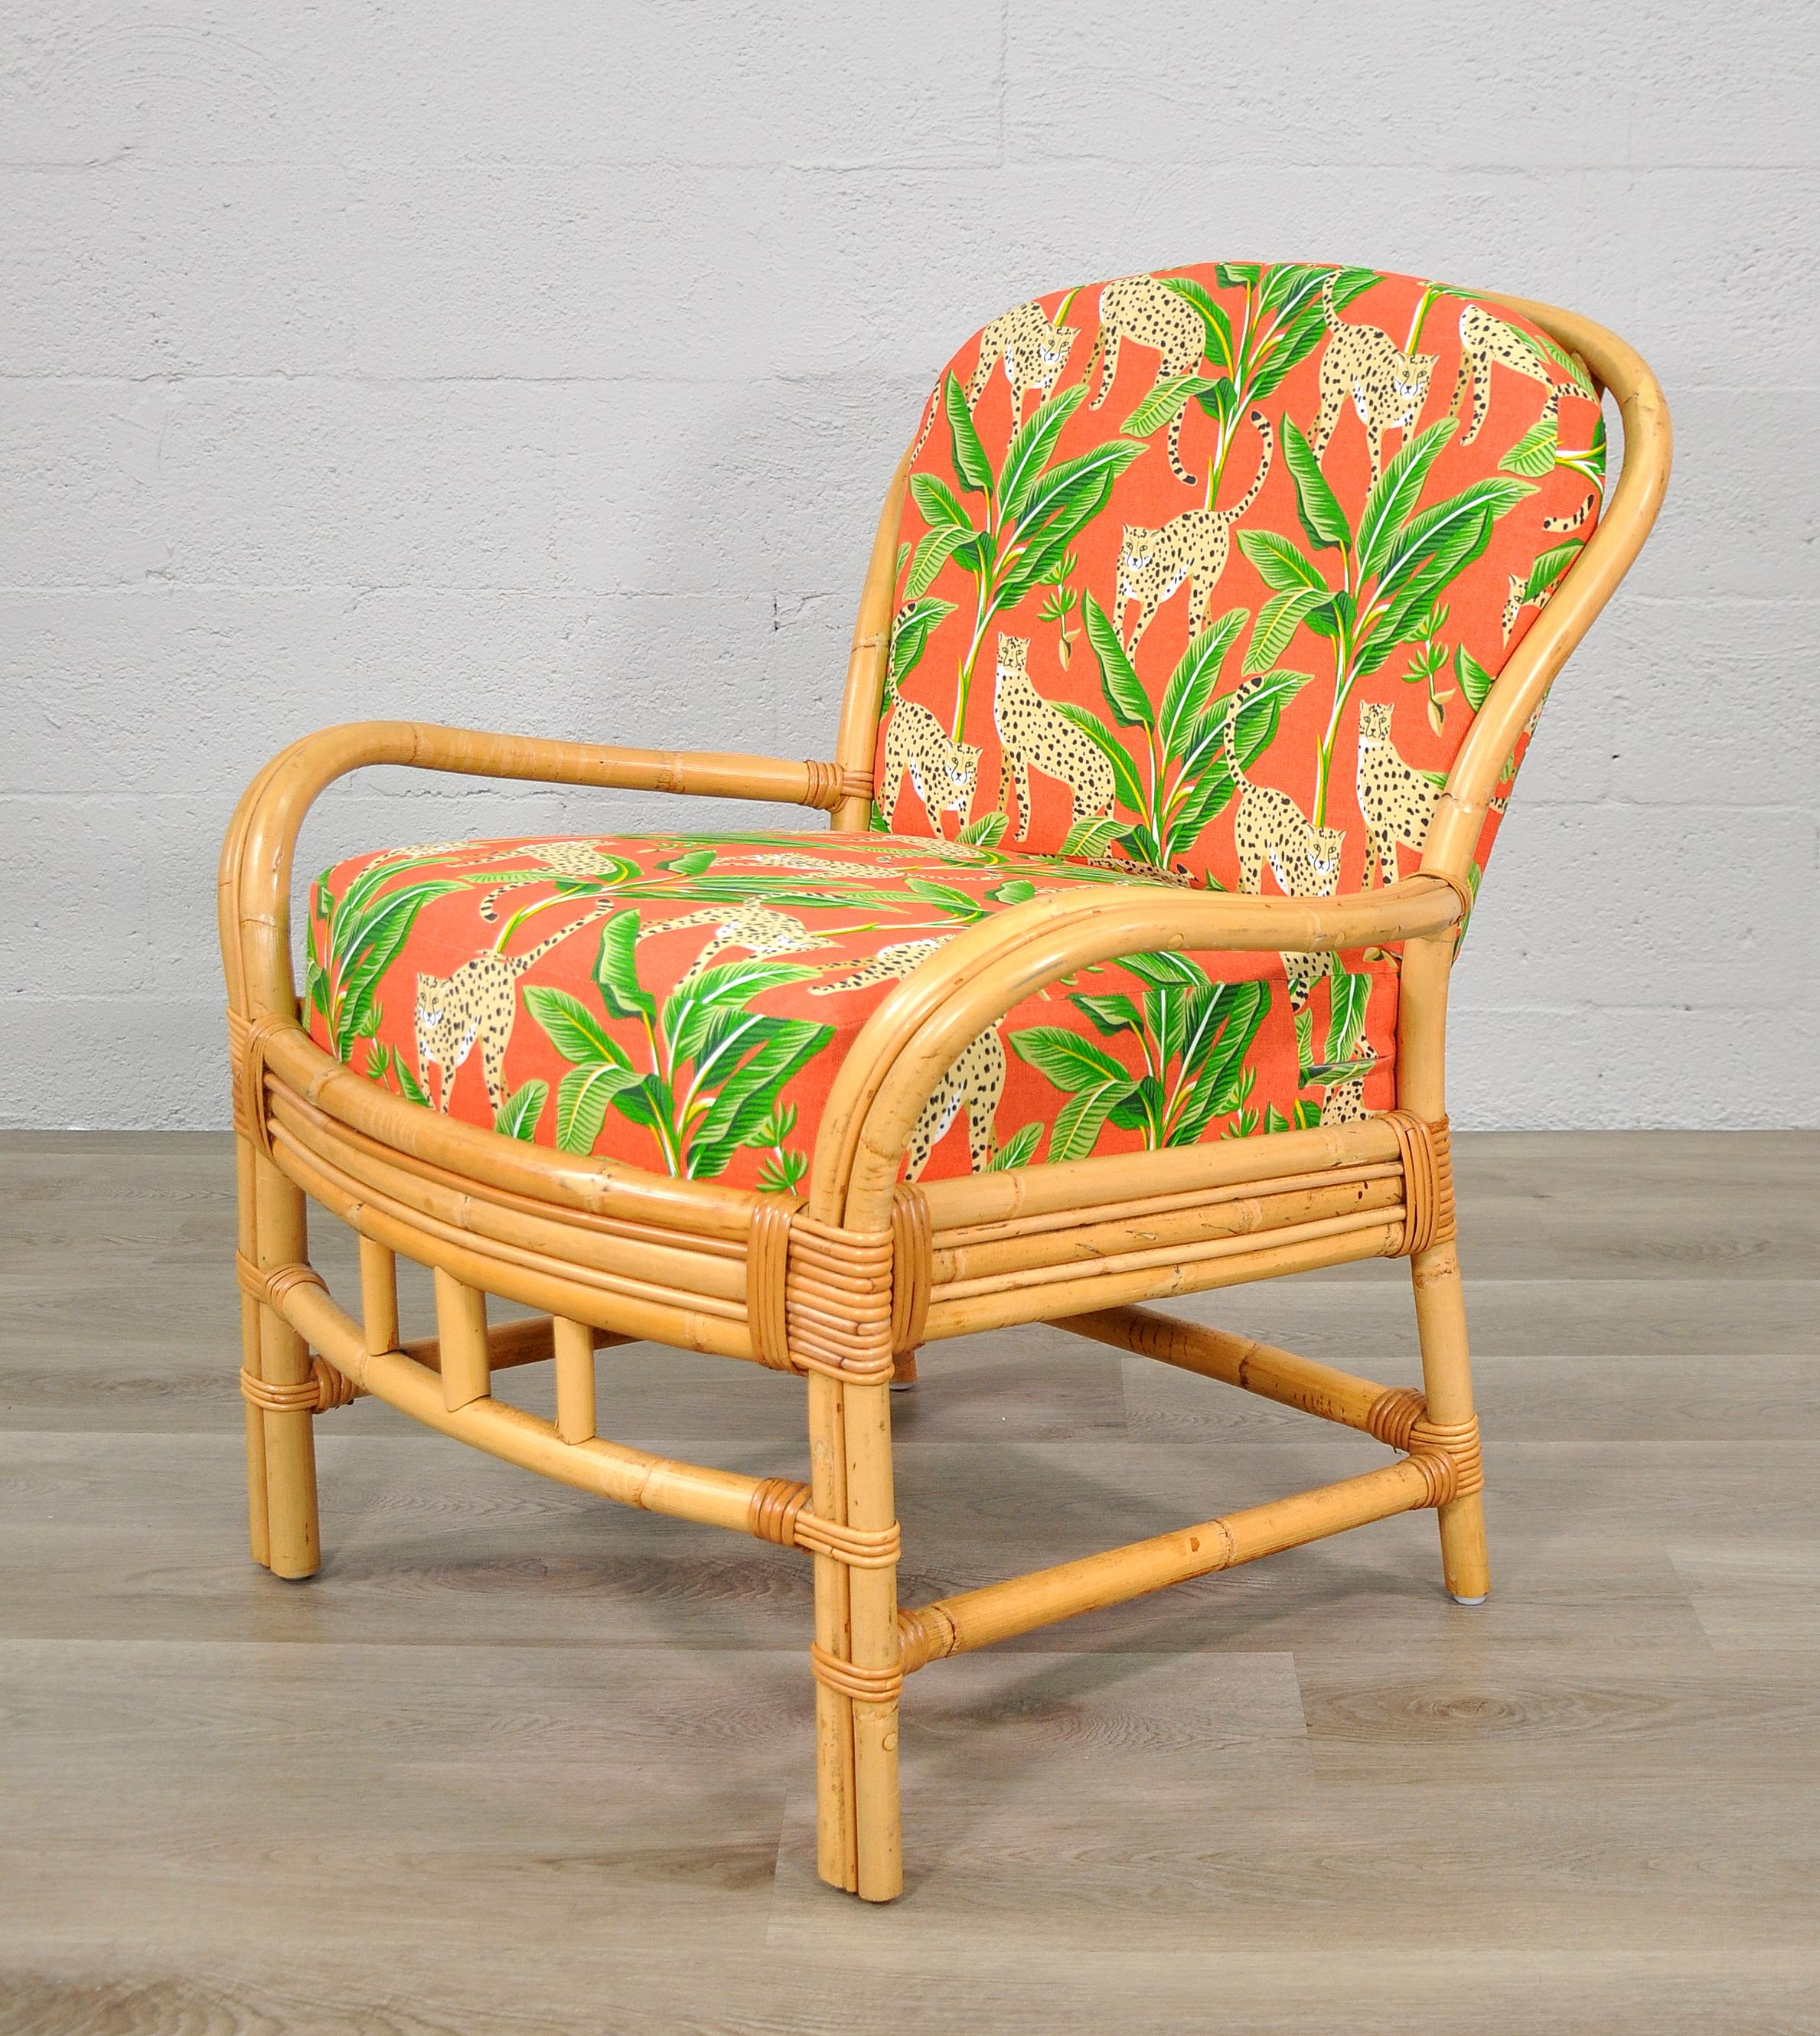 New cushions with emerald green and salmon orange indoor / outdoor fabric on this vintage rattan armchair. Made in San Francisco, California by Palecek. The new removable cushions have been covered in a performance fabric with tropical themed